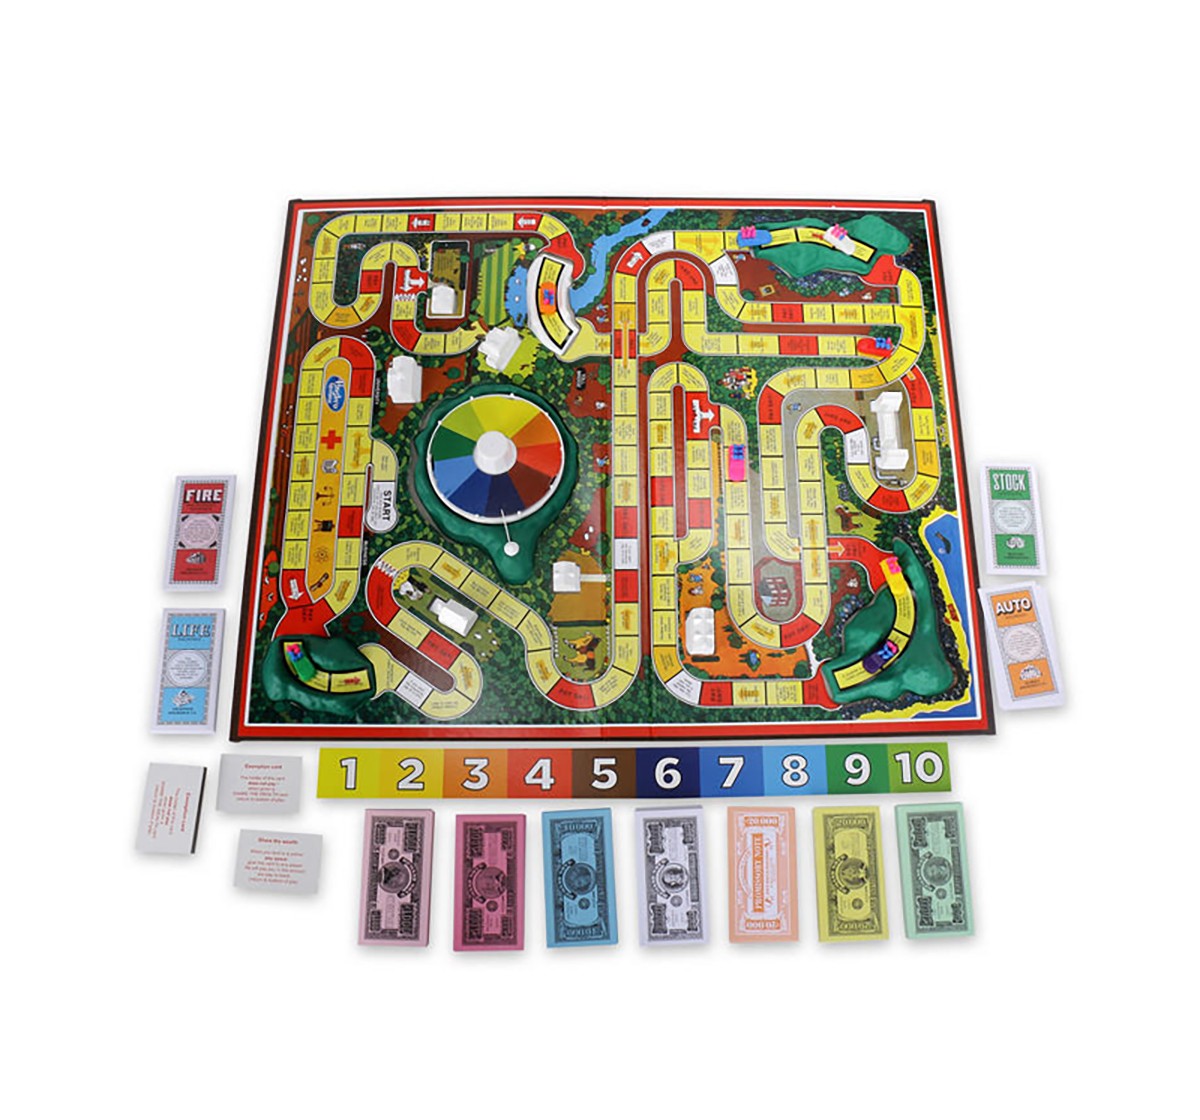 Hasbro The Game Of Life Board Game For Families And Kids Board Games for Kids age 8Y+ 